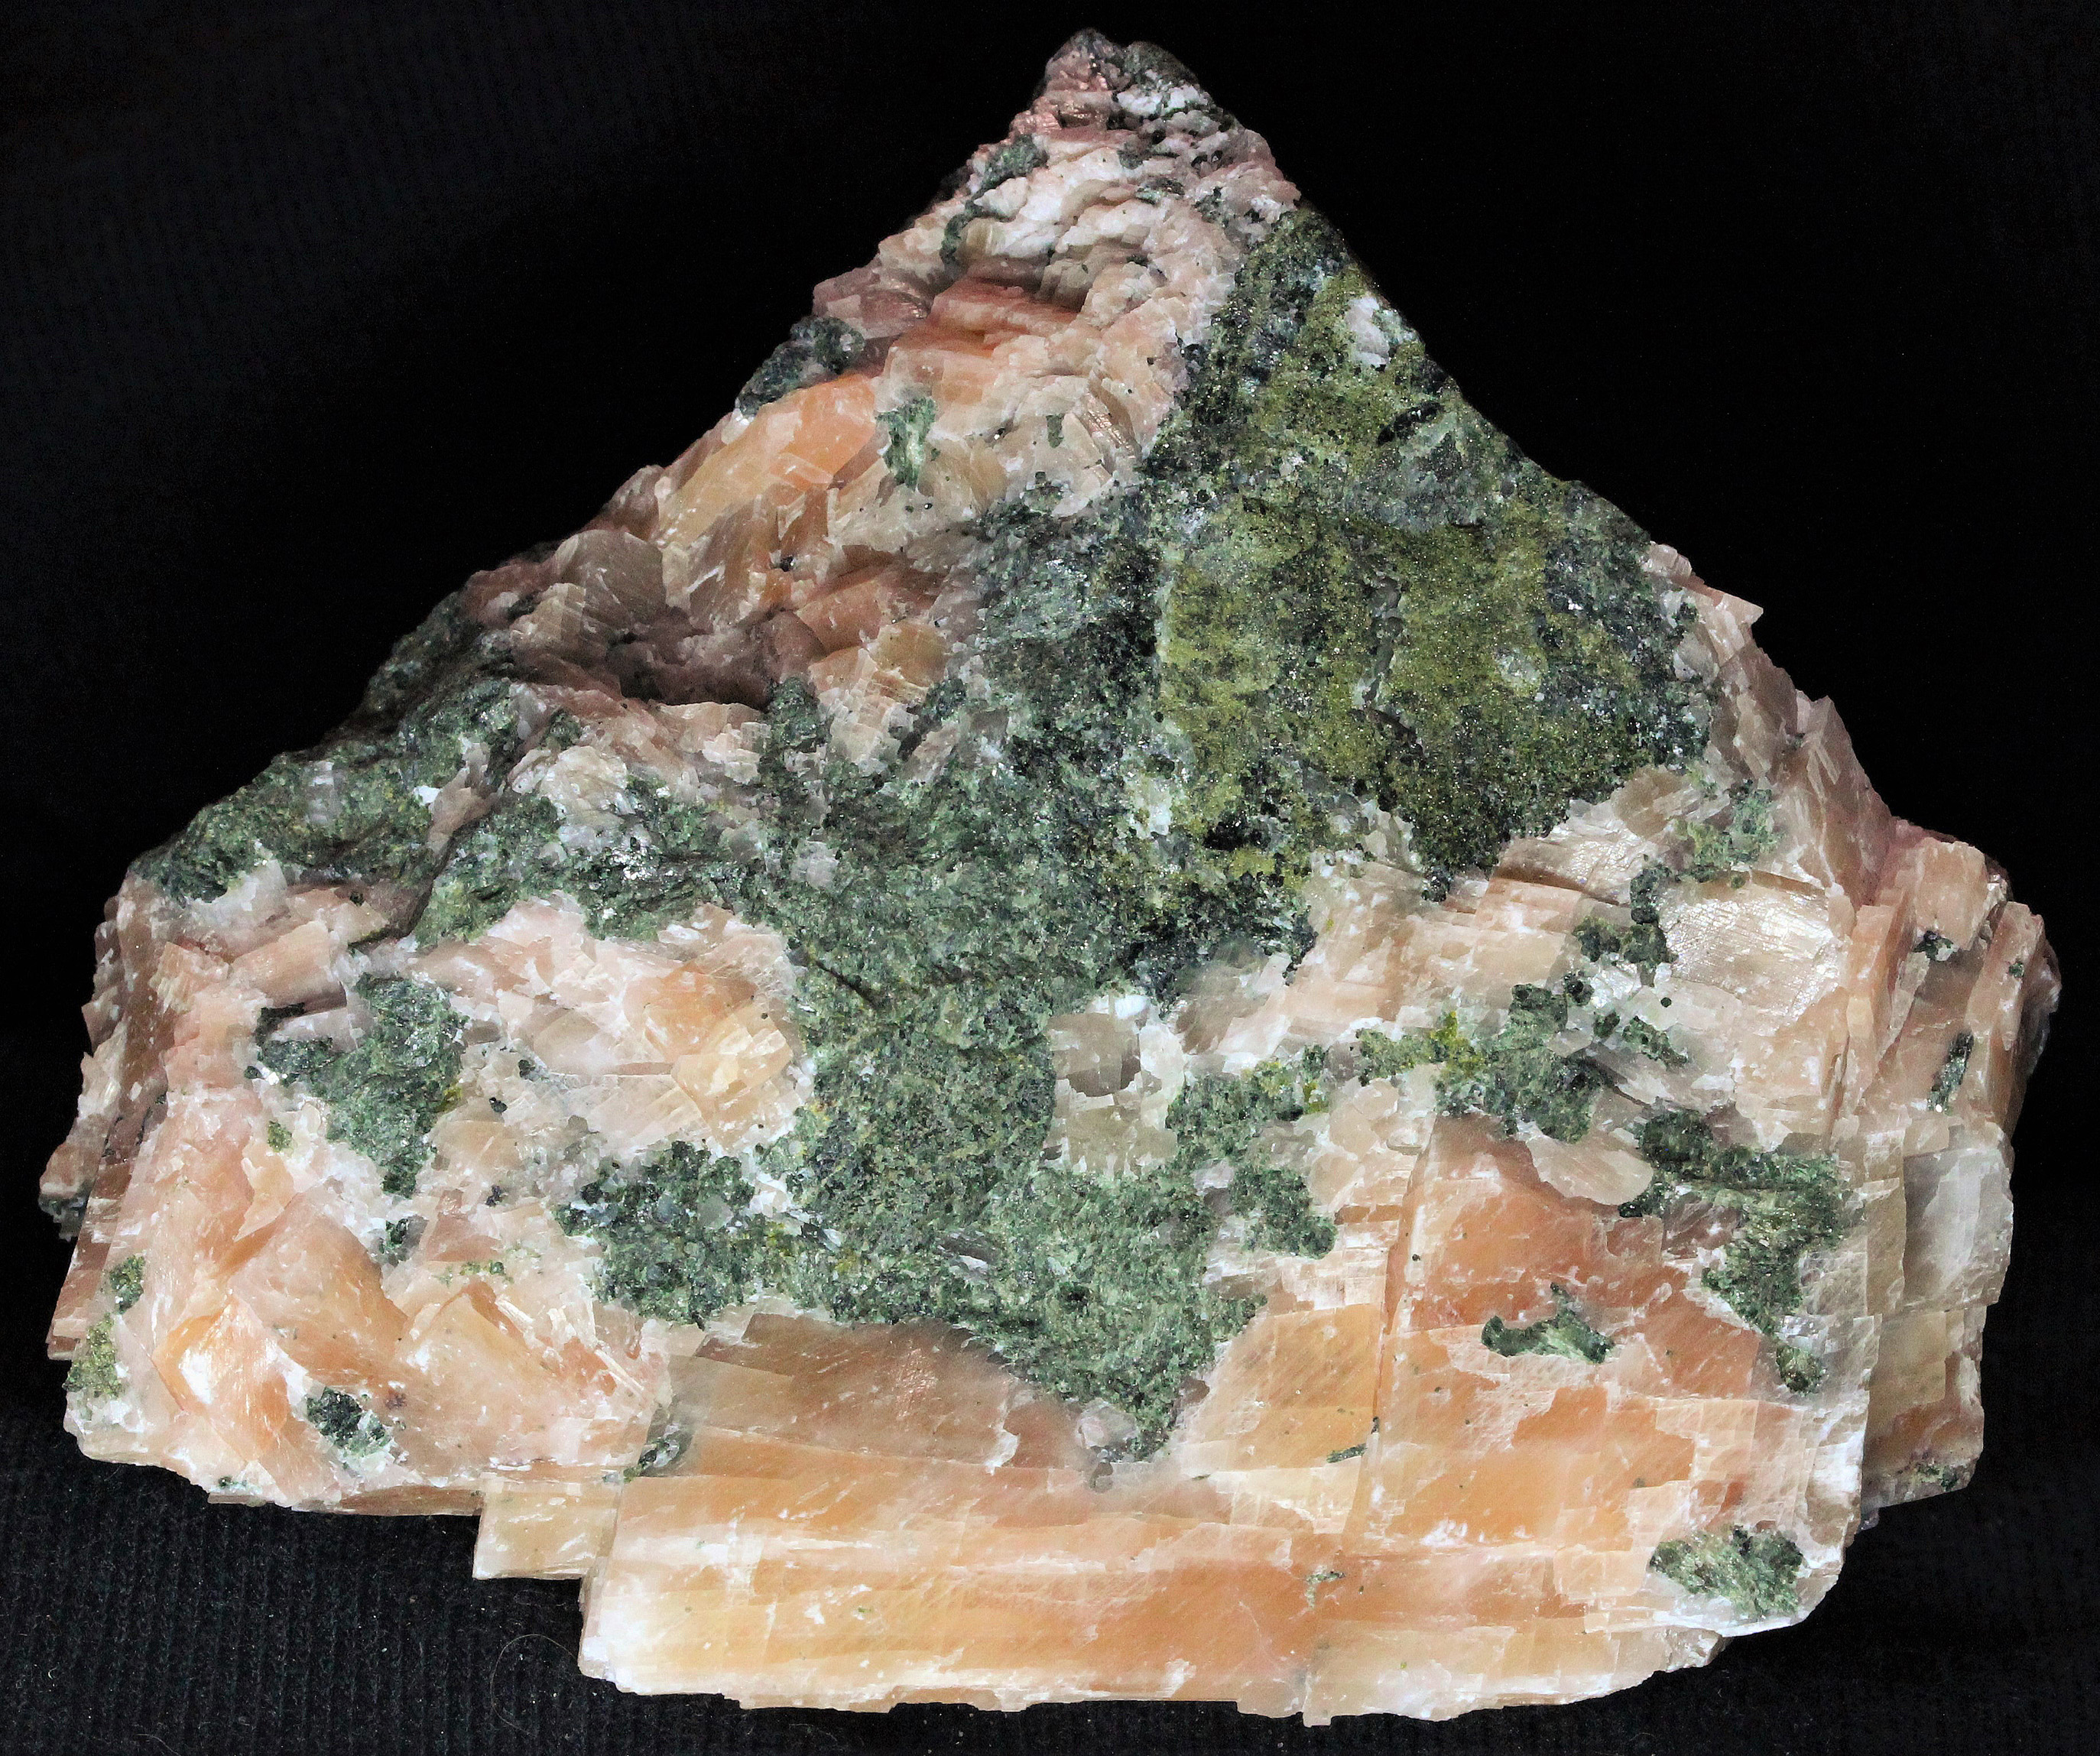 Epidote and salmon calcite from the Mill Site, Franklin, NJ. Photo by WP.